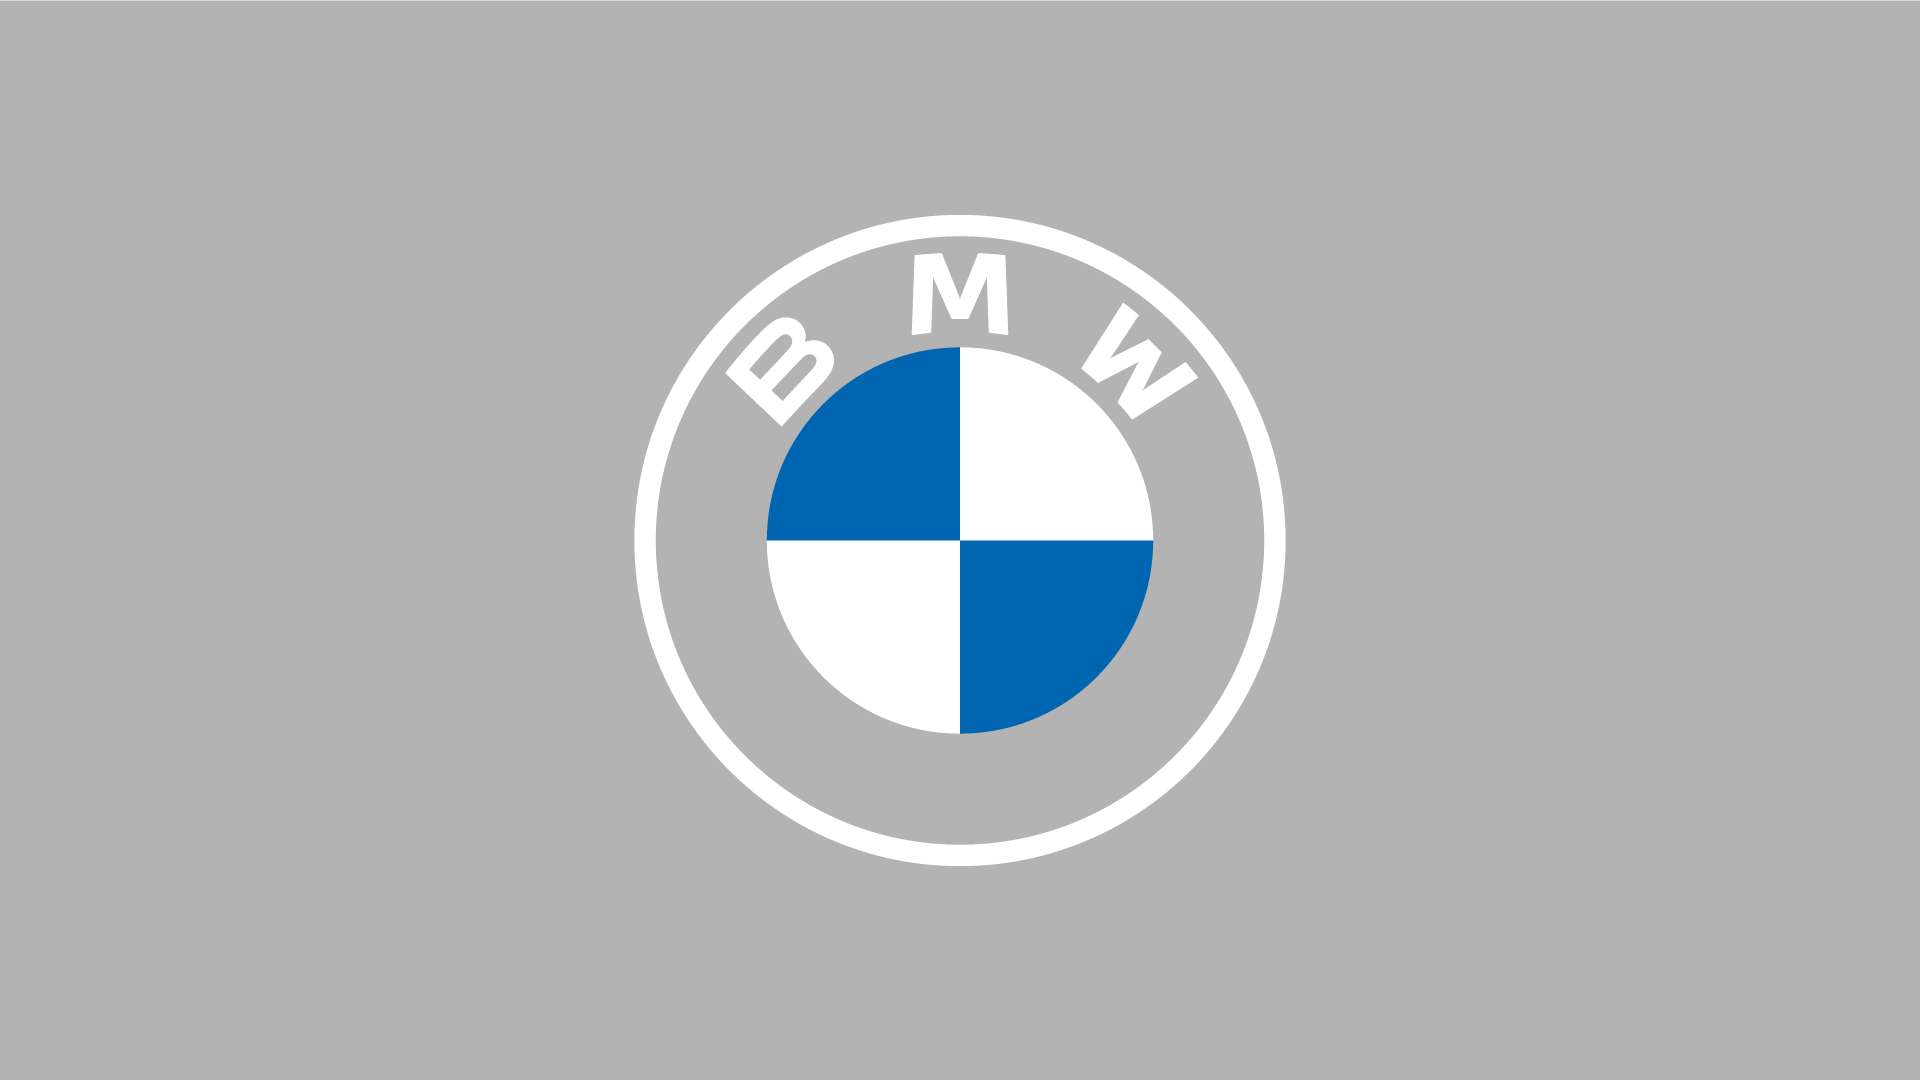 Here comes the new logo of BMW